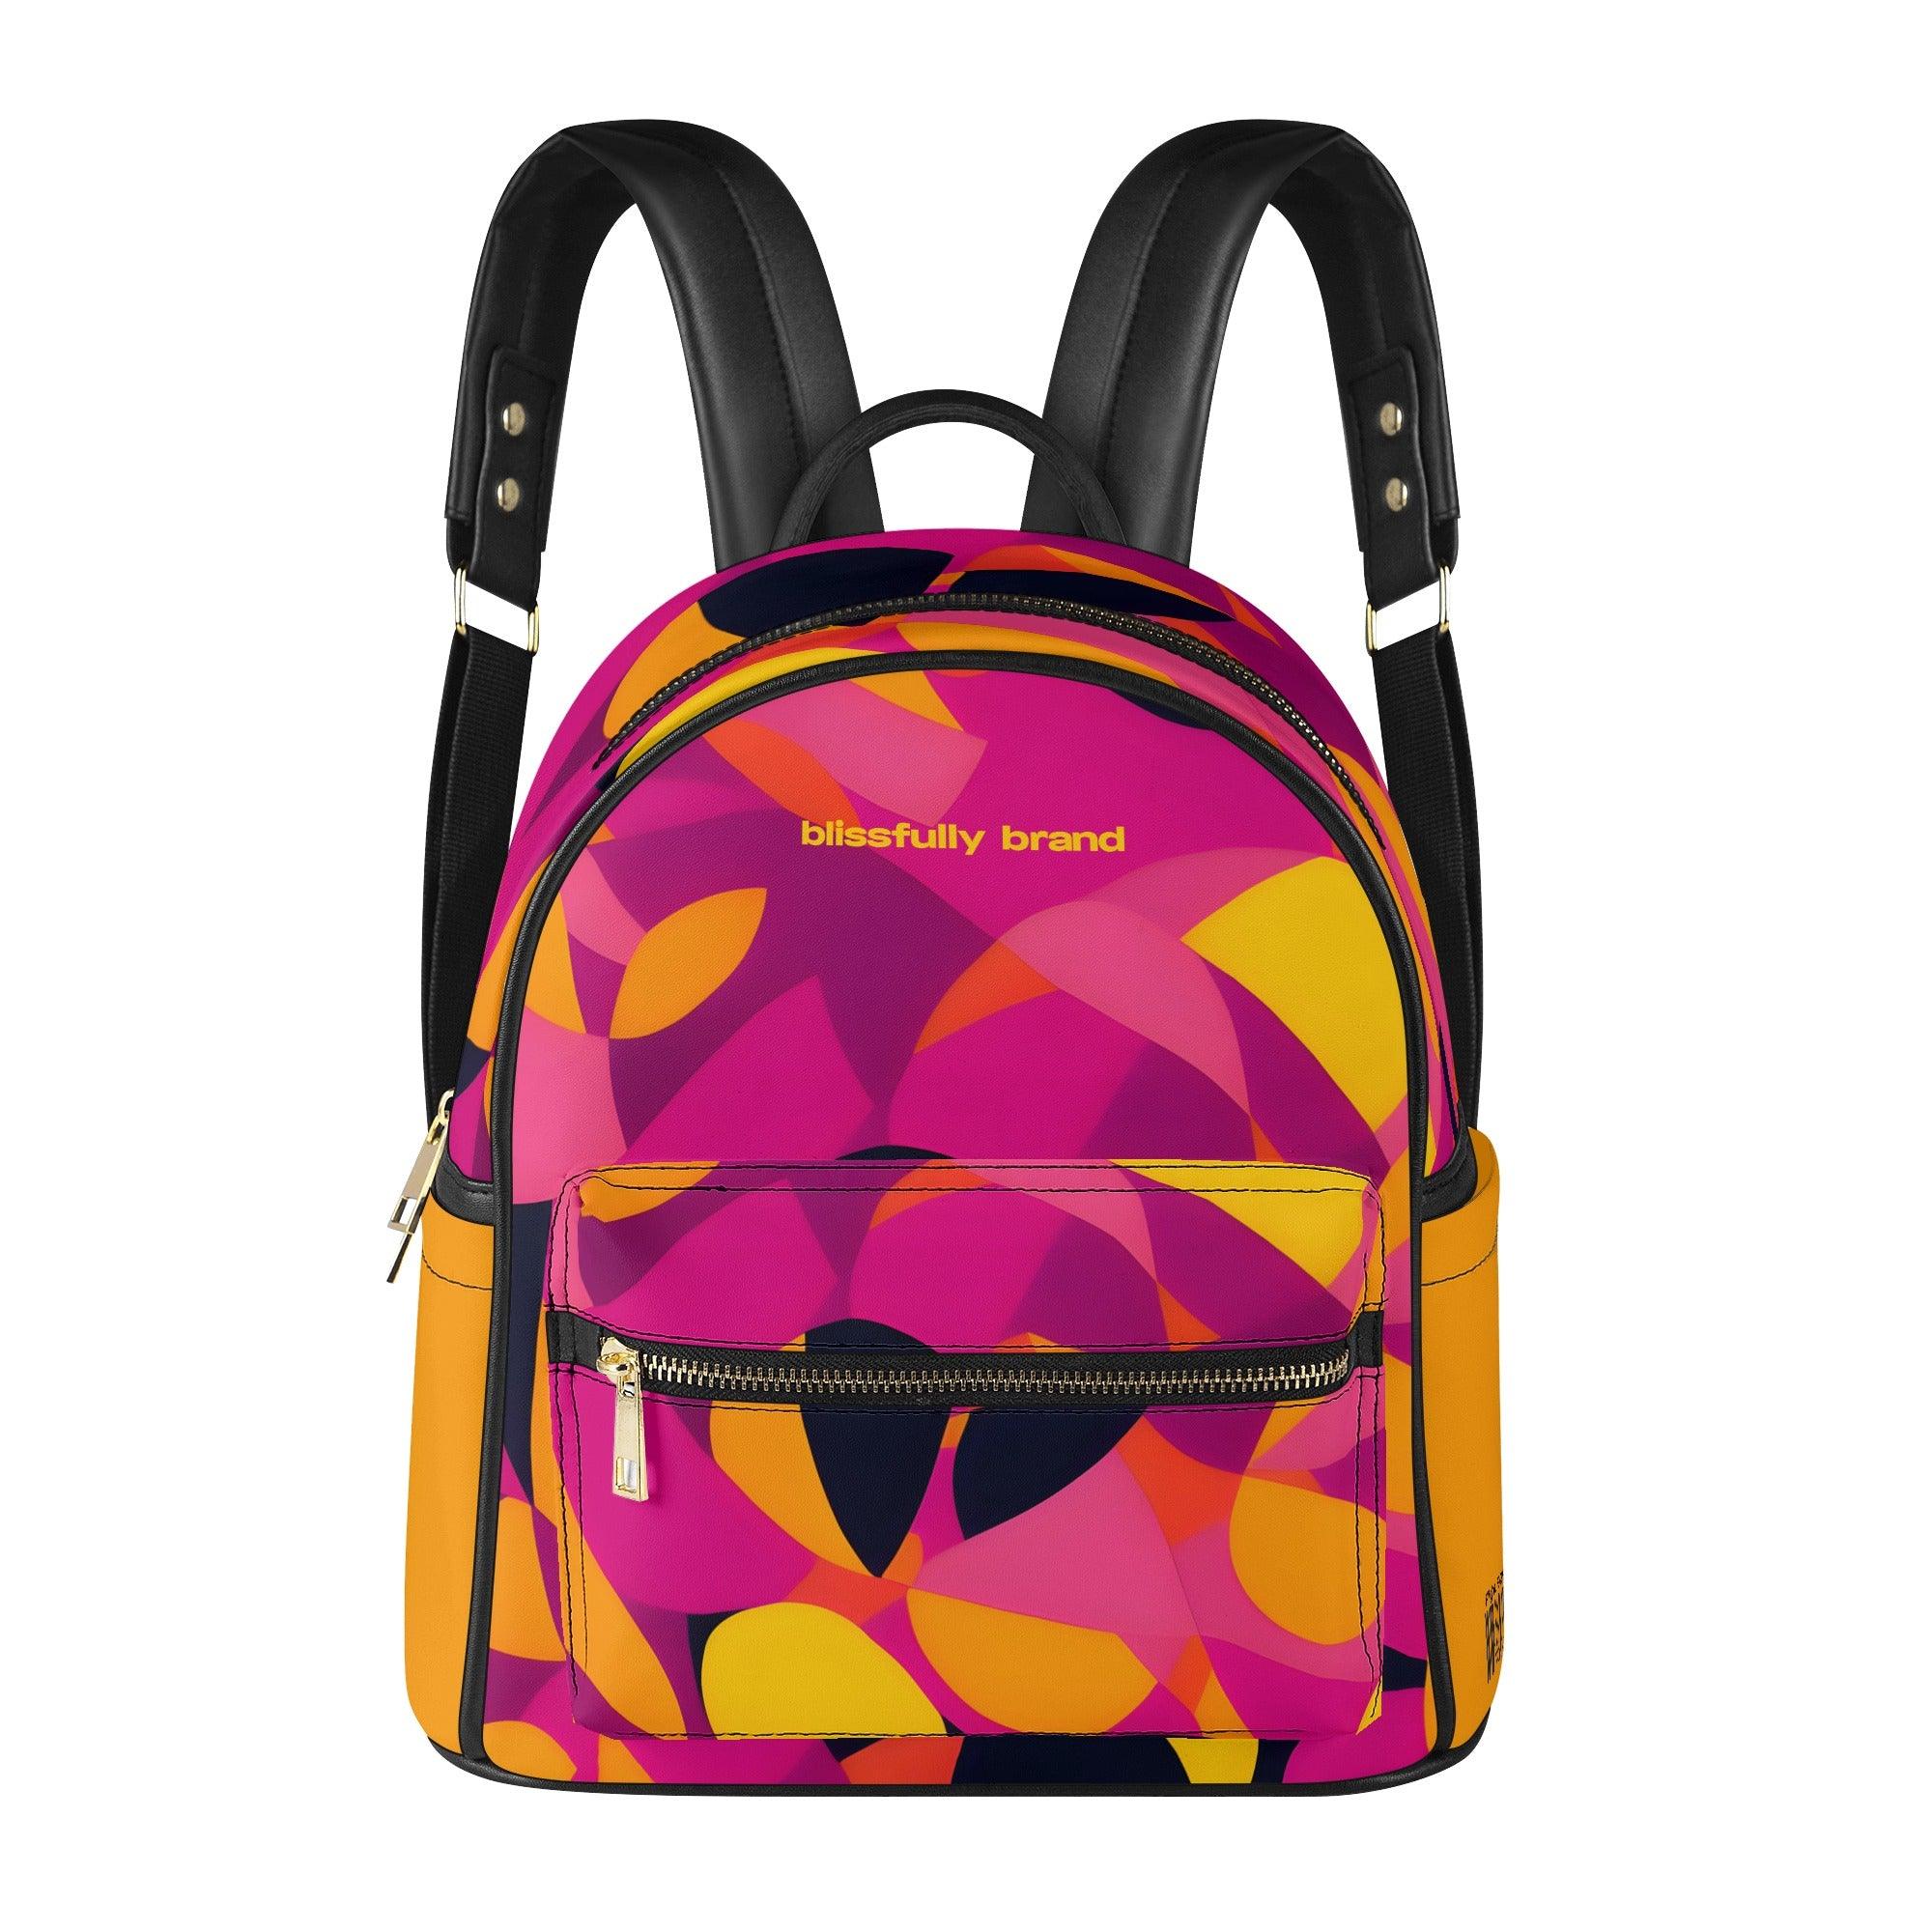 Airline Series Small Vegan Leather Backpack - Abstract Pink Yellow Orange Retro Mod Funky Day Pack Bold Vibrant Travel Urban Women's All Over Print Blissfully Brand Flight 929 Munich Psychedelic 70's pop art Geometric